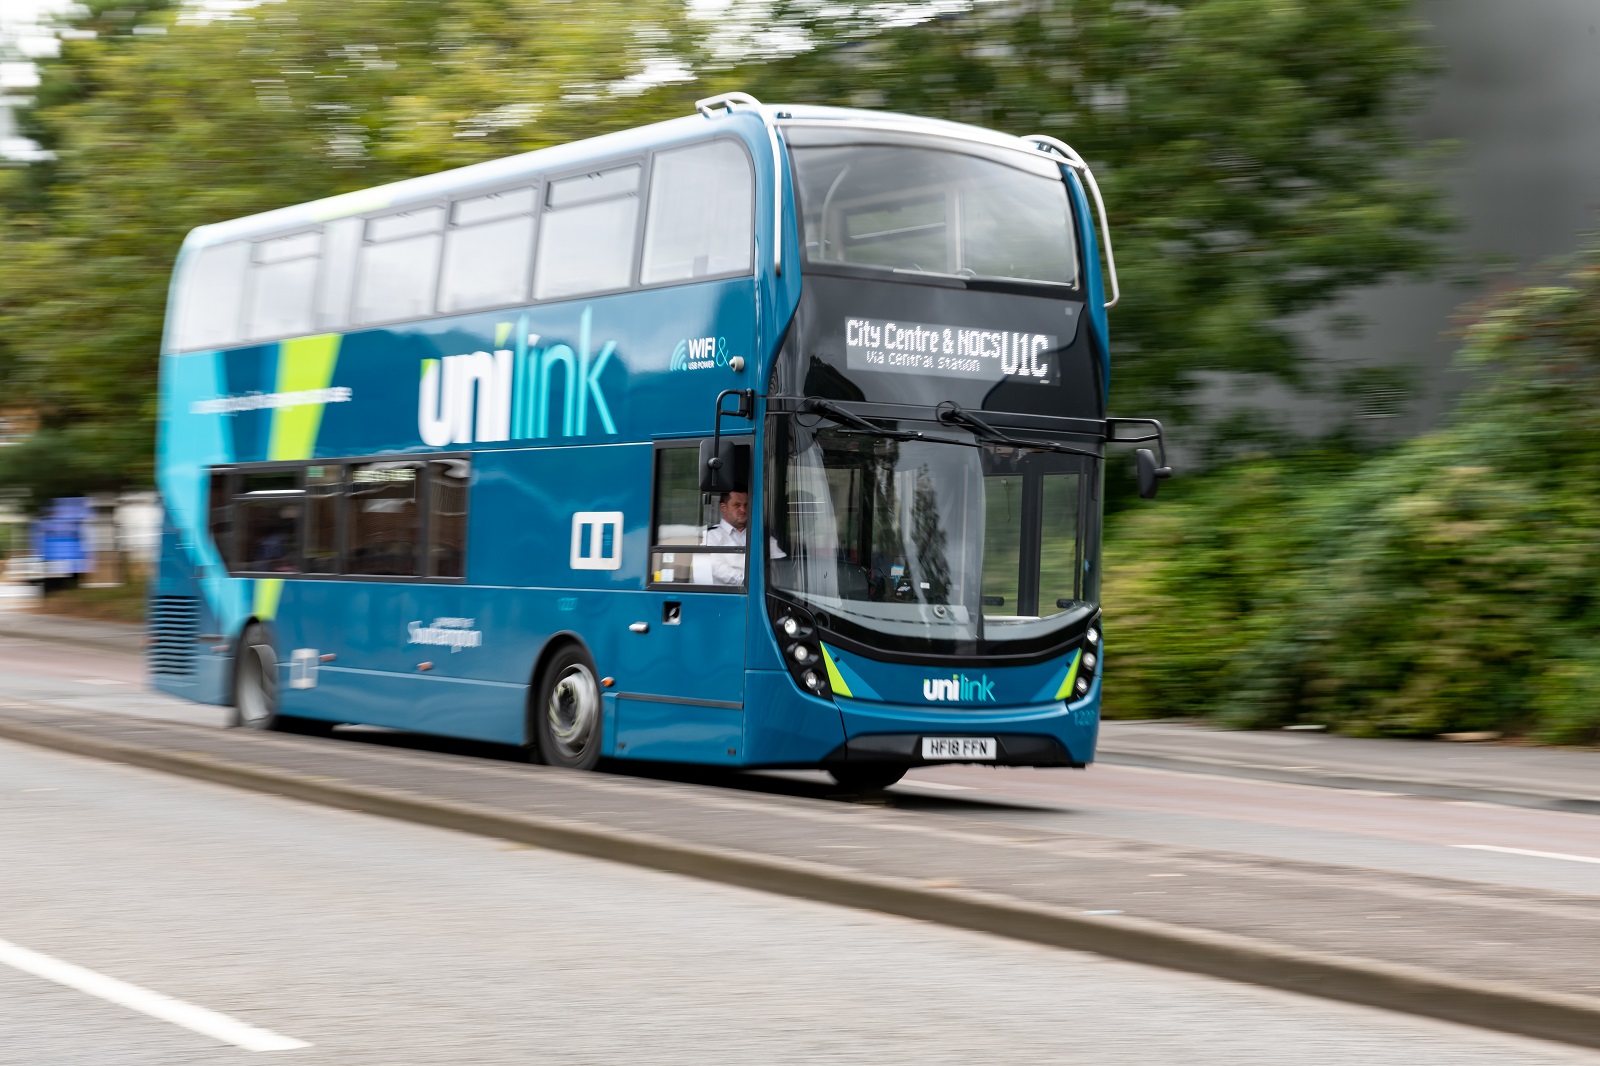 Business as usual for bus travel in Southampton - Unilink Buses